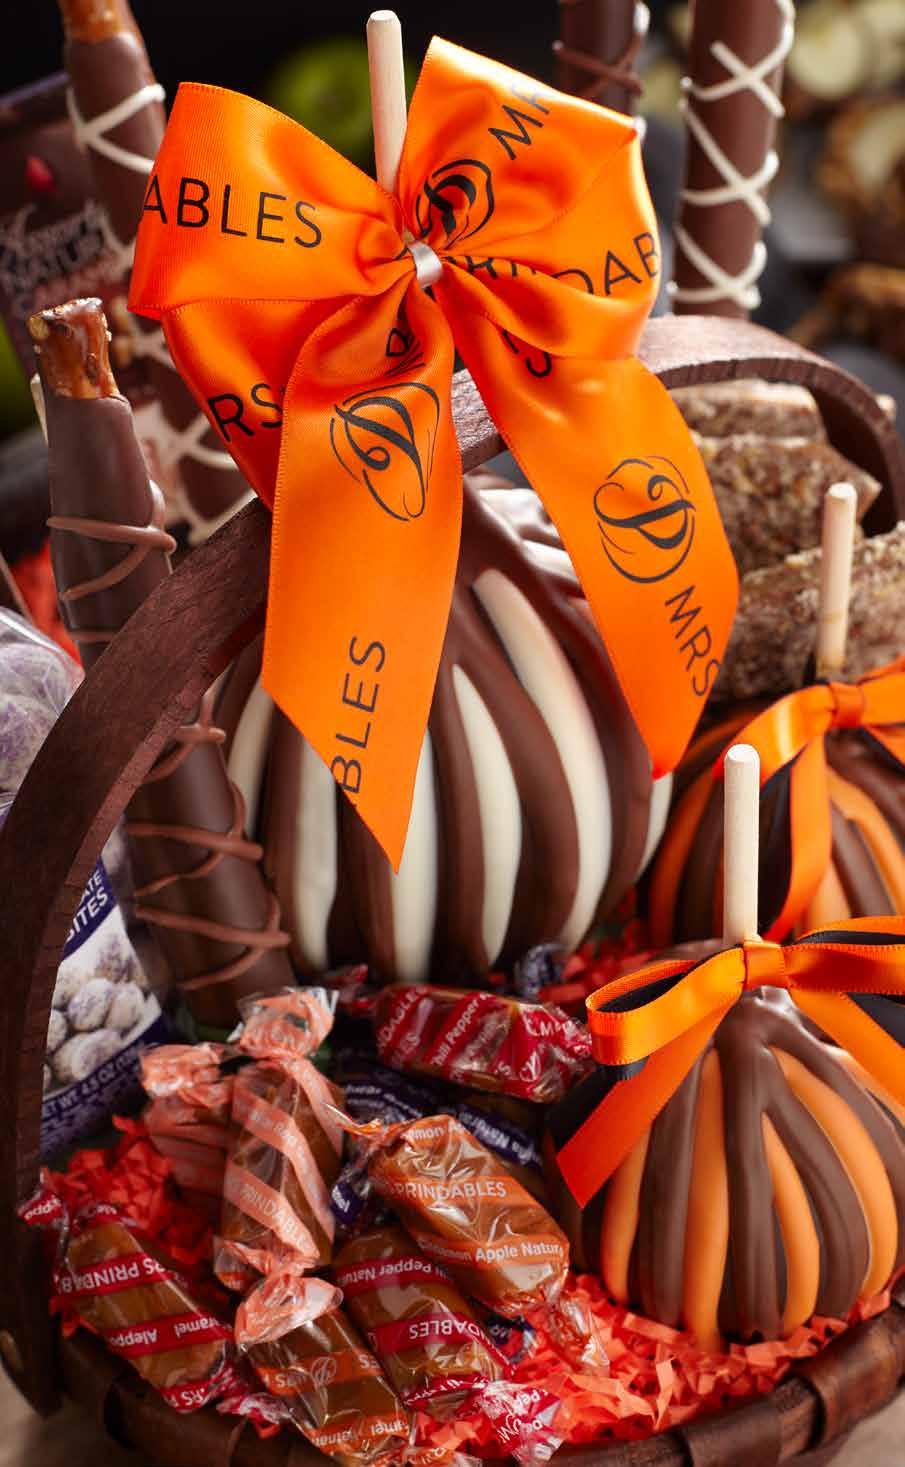 Classic Halloween Caramel Apple Gift Basket A welcome Halloween surprise, this gift basket is filled with Gourmet Caramel Apples and Confections.